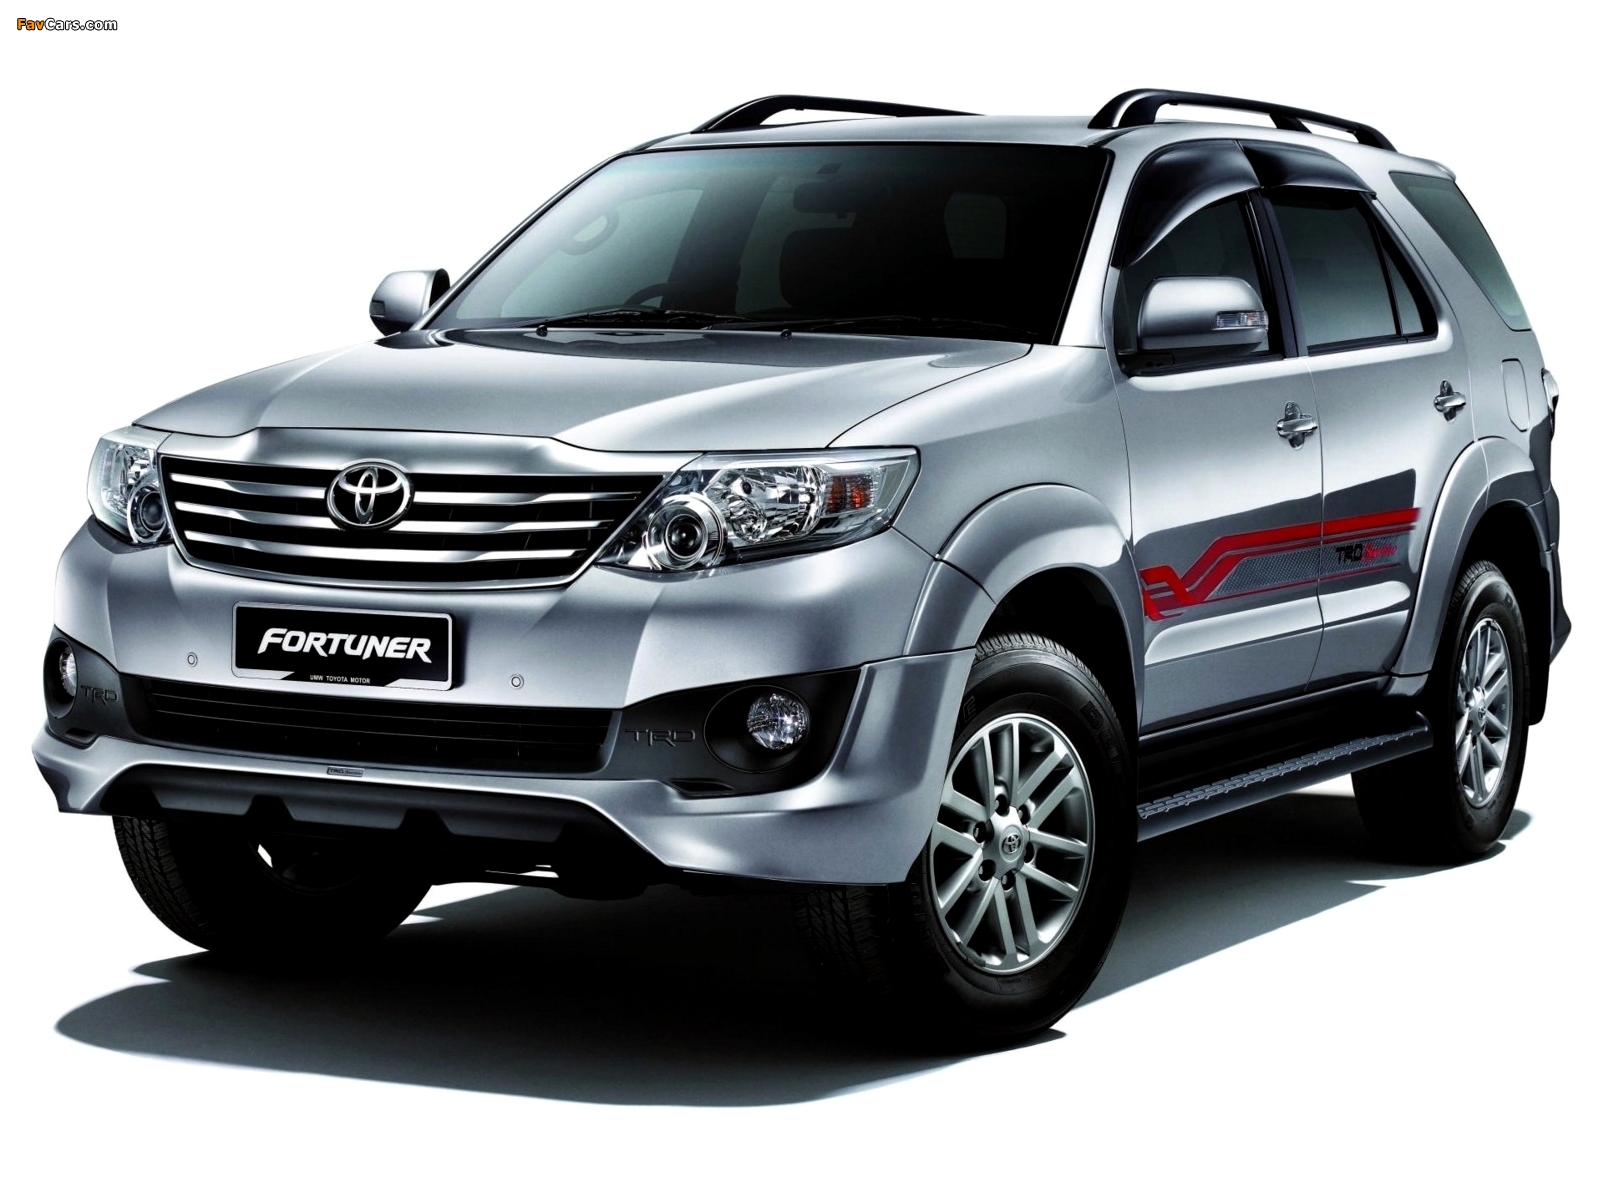 TRD Toyota Fortuner Sportivo 2011 wallpapers (1600x1200)